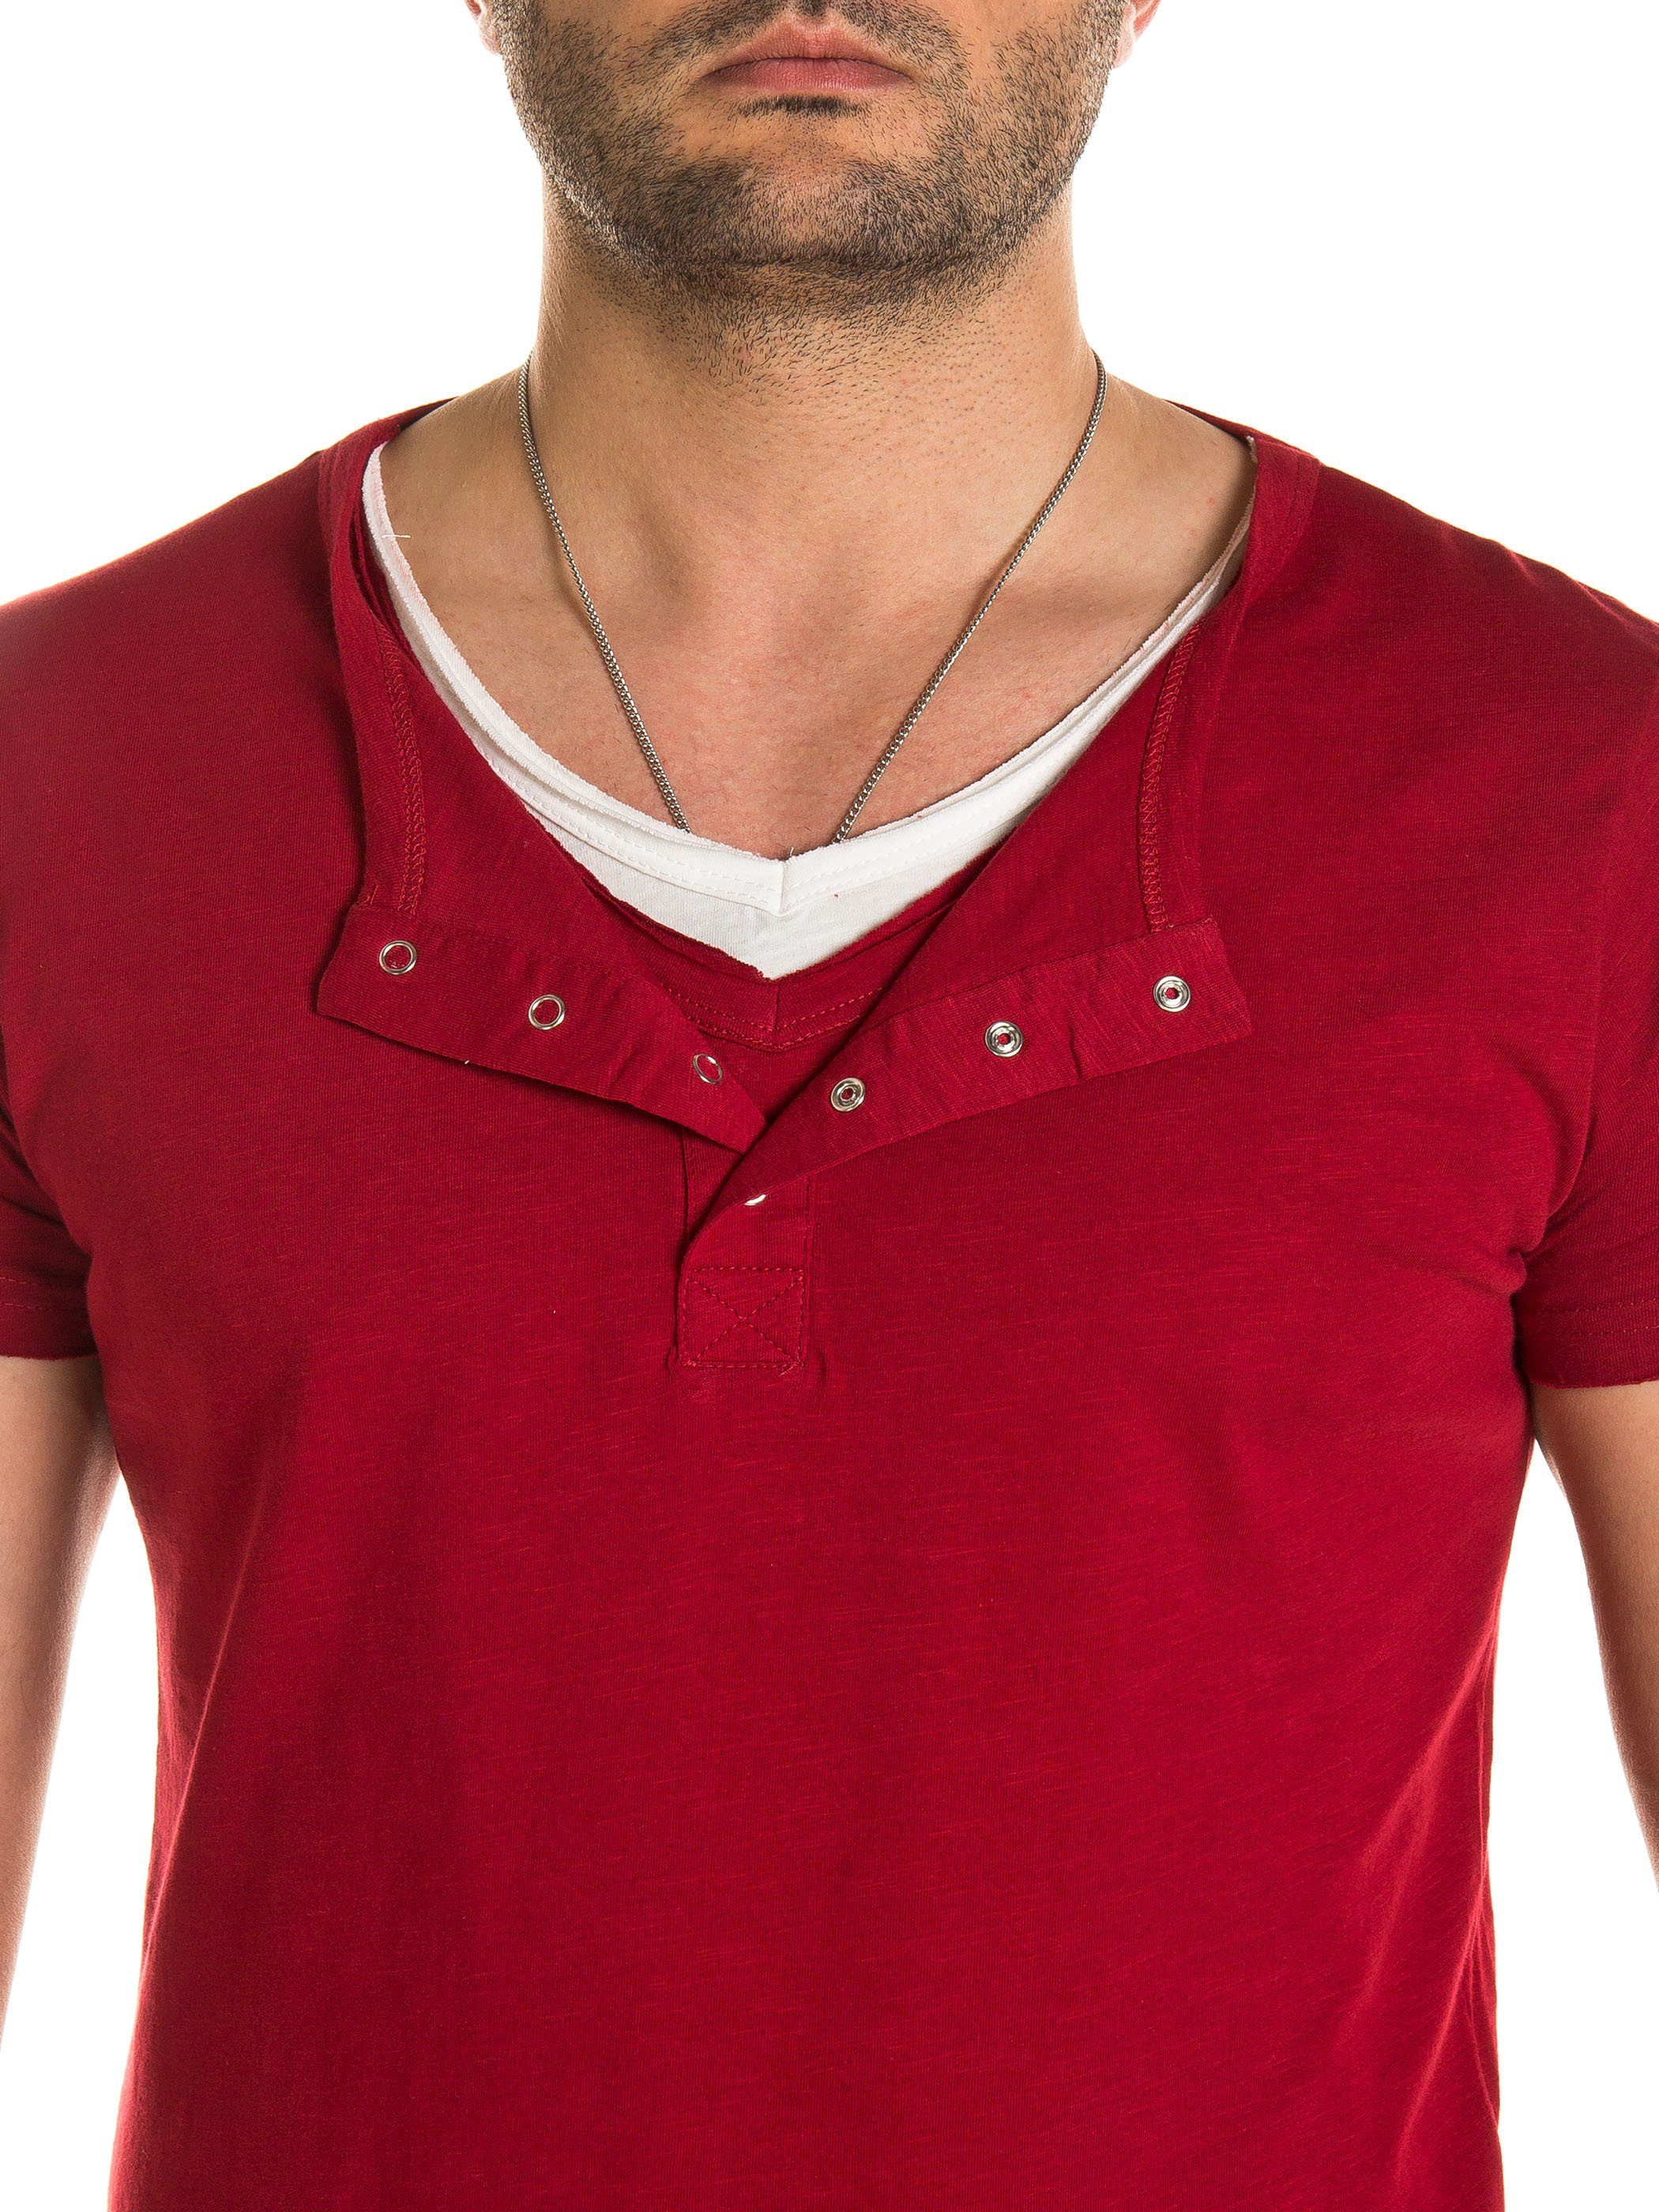 T-Shirt (Packung) T-Shirt T-Shirt V-Neck red Double Rot 190511) V-Neck Pete WOTEGA Pete Layer Layer Double (biking